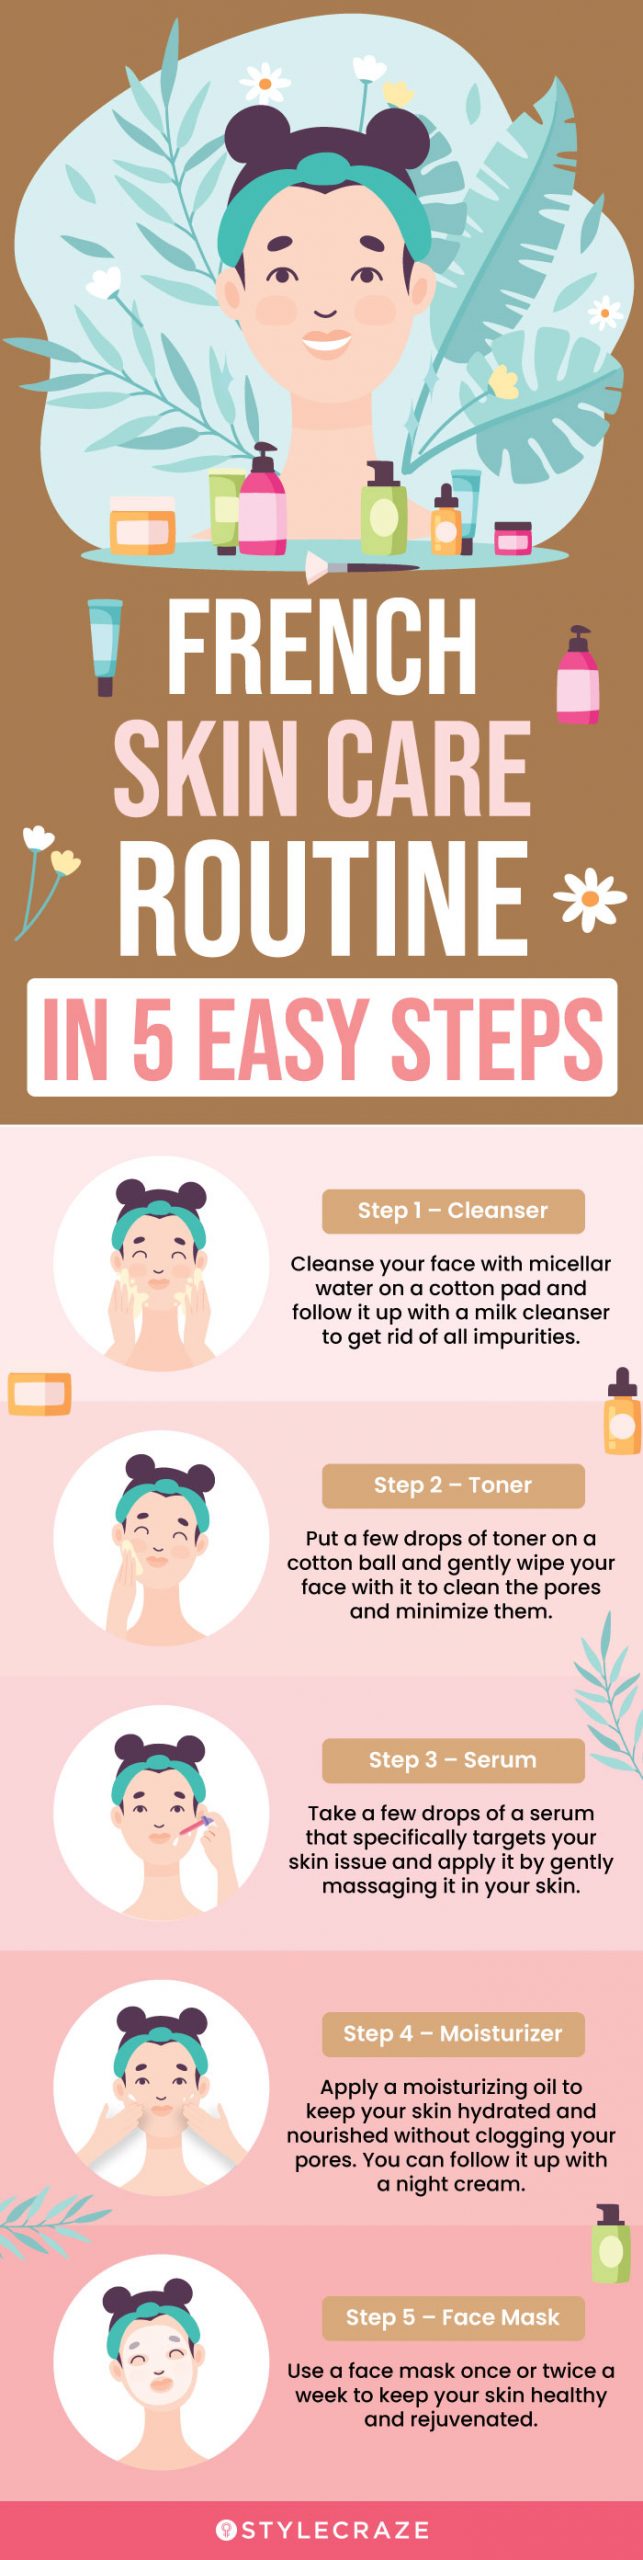 french hair care routine in 5 easy steps(infographic)